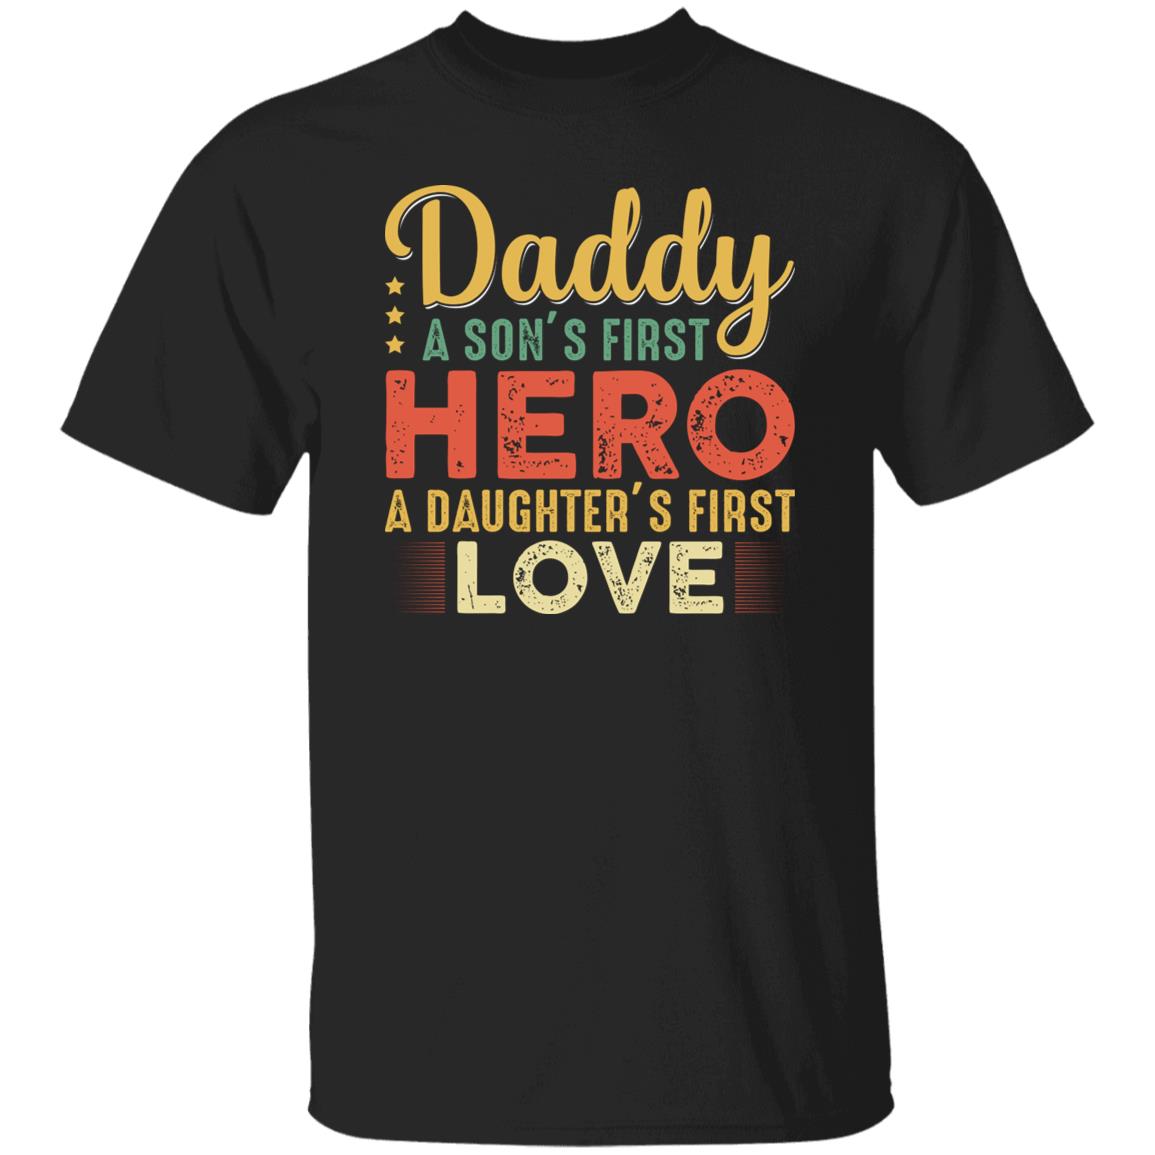 Daddy a Son's First Hero a Daughter's First Love Tshirt